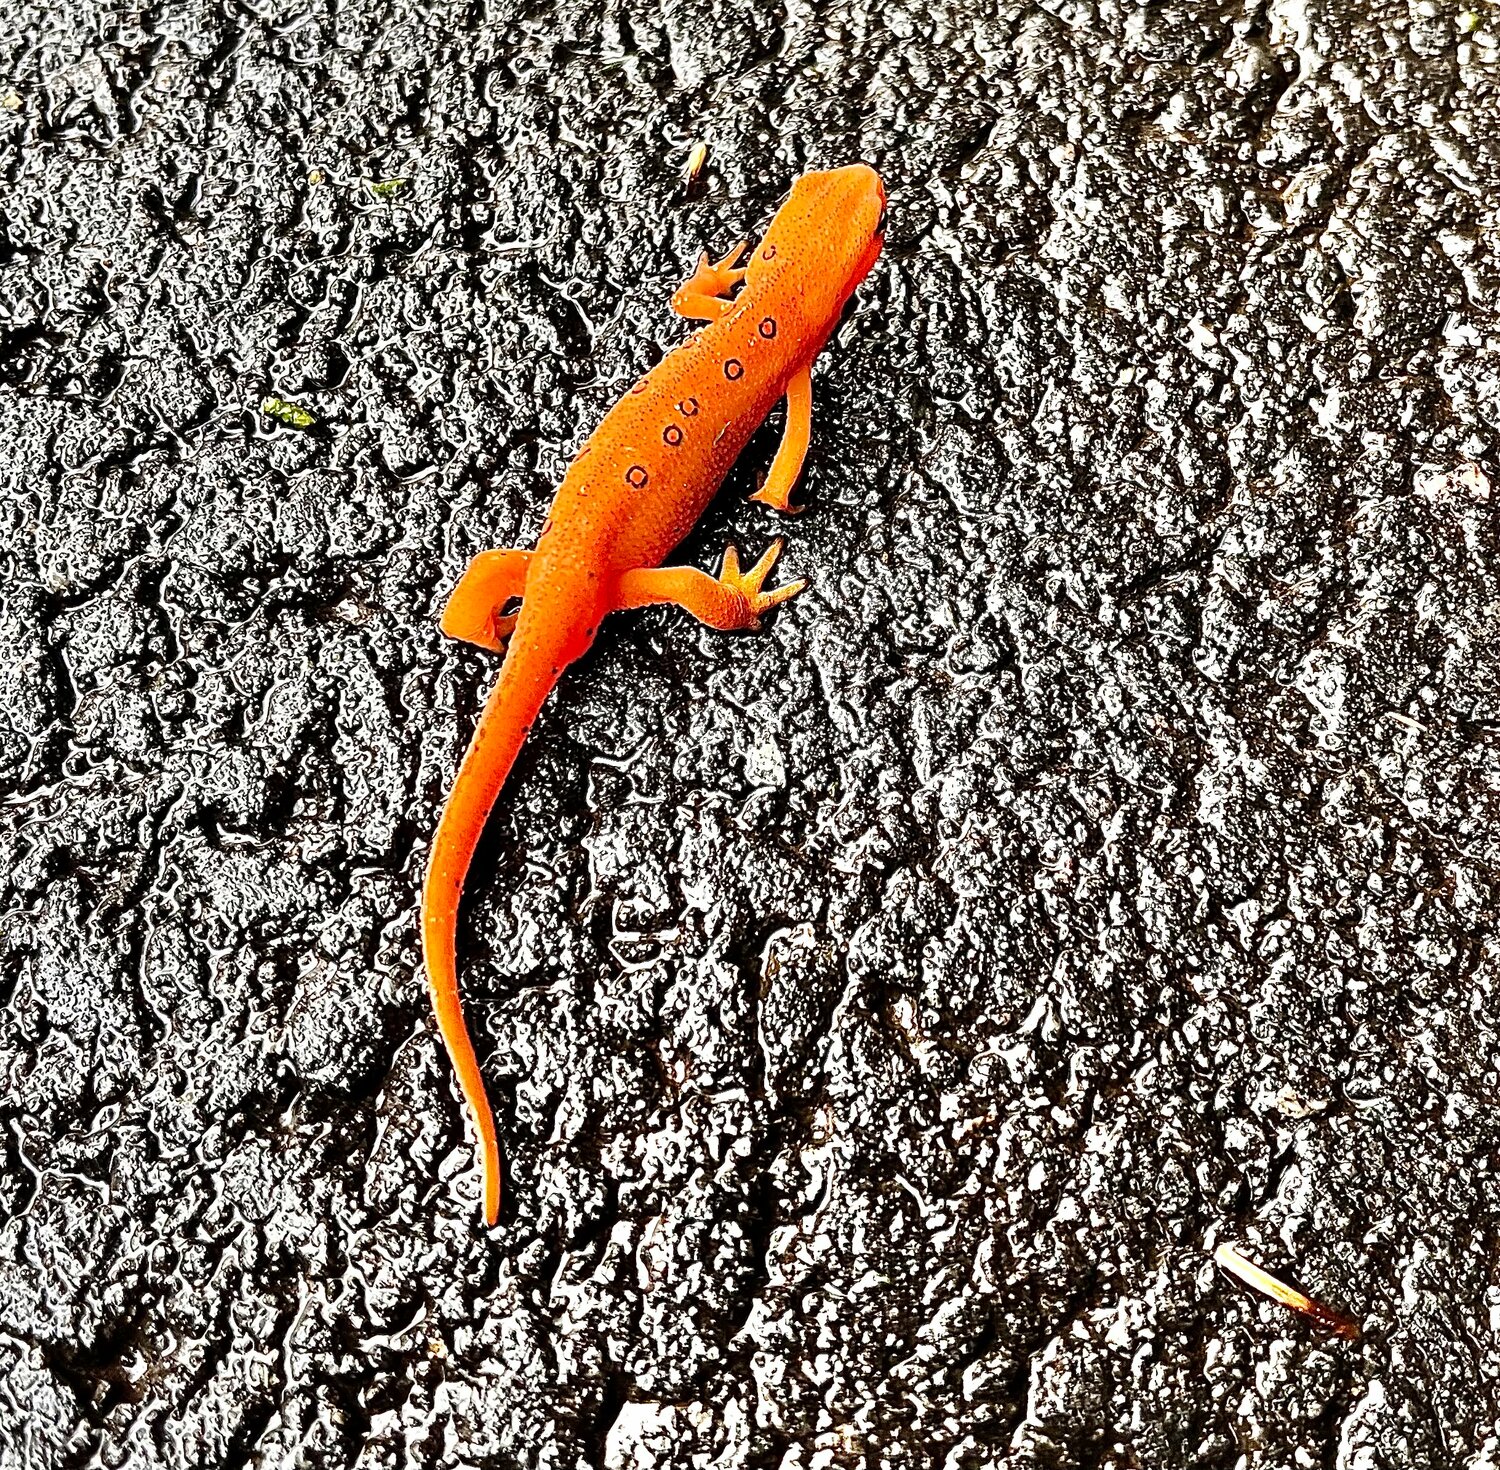 The juvenile red eft can be identified by its bright orange-red coloration with small black dots scattered on the back and a row of larger, black-bordered orange spots on each side.